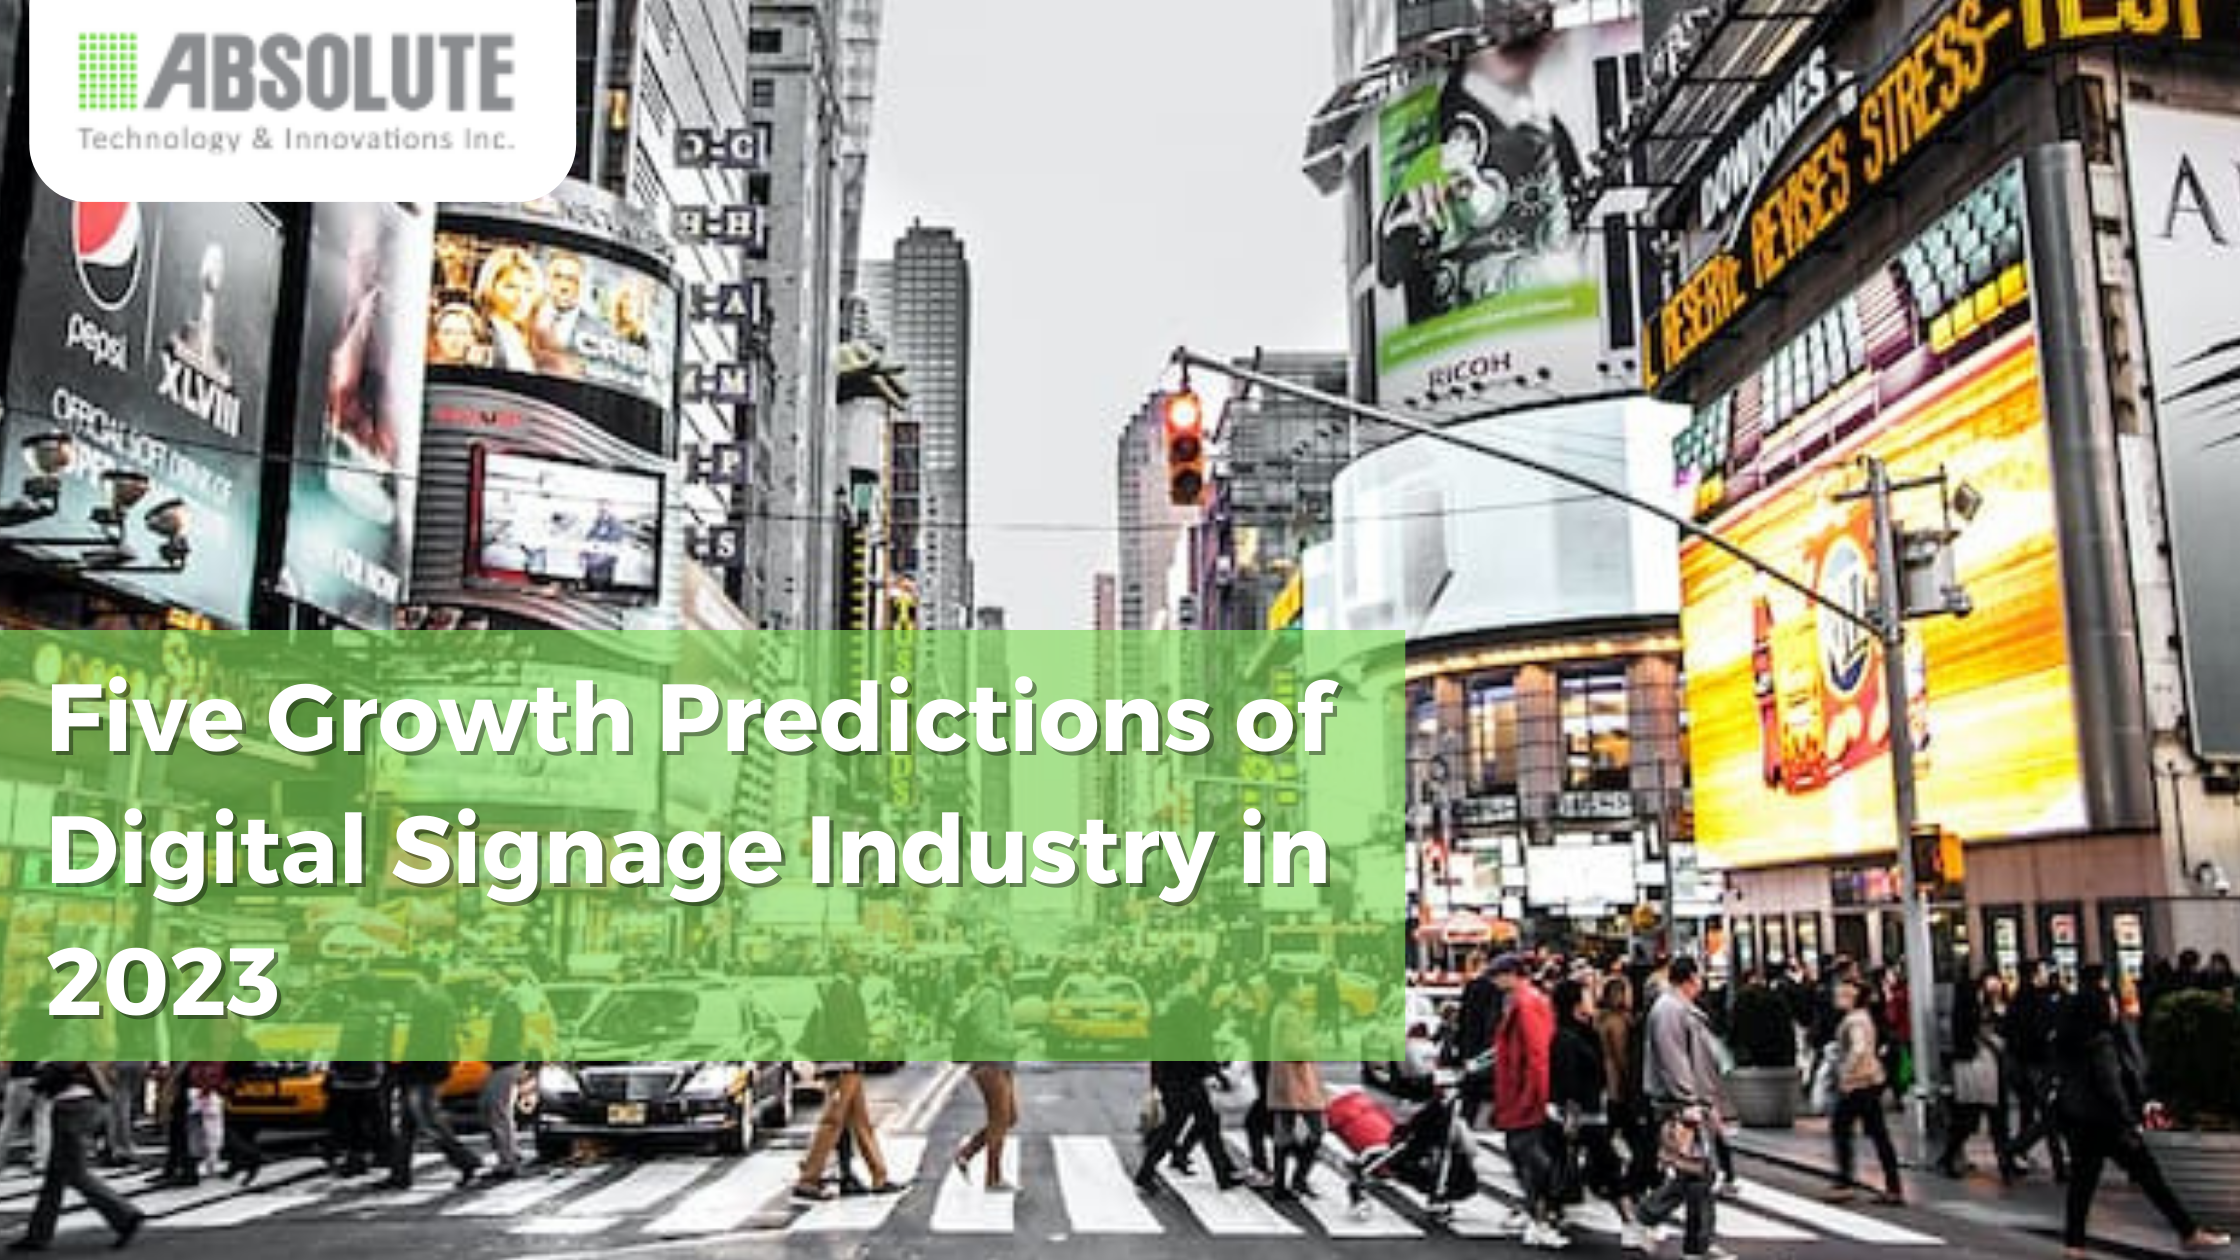 Five Growth Predictions of Digital Signage Industry in 2023